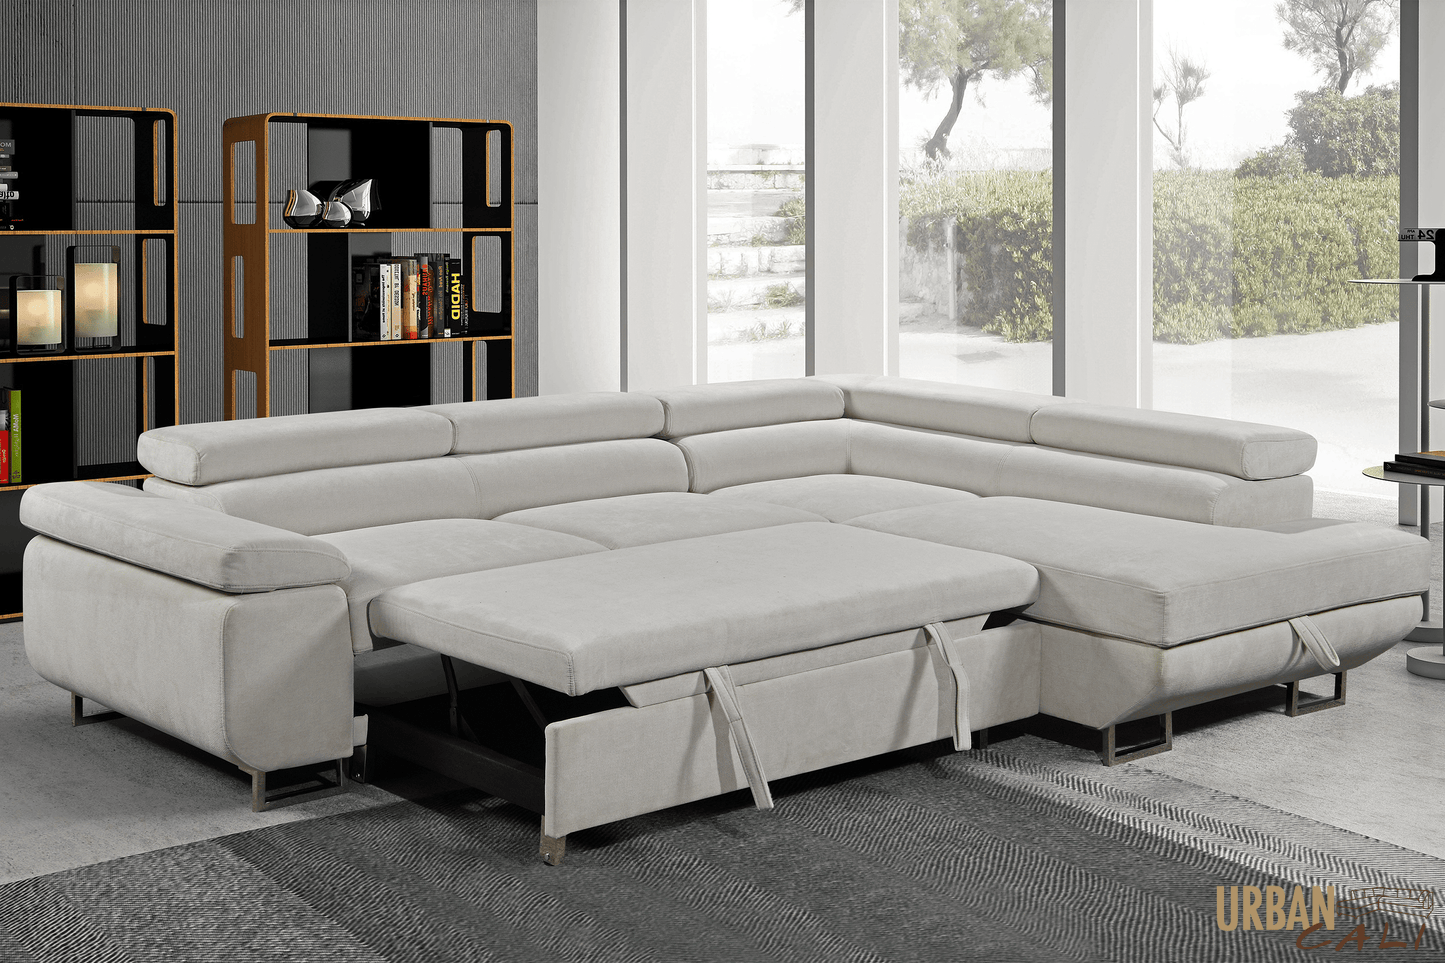 Pending - Urban Cali Hollywood Sleeper Sectional Sofa Bed with Adjustable Headrests and Storage Chaise in Ulani Cream